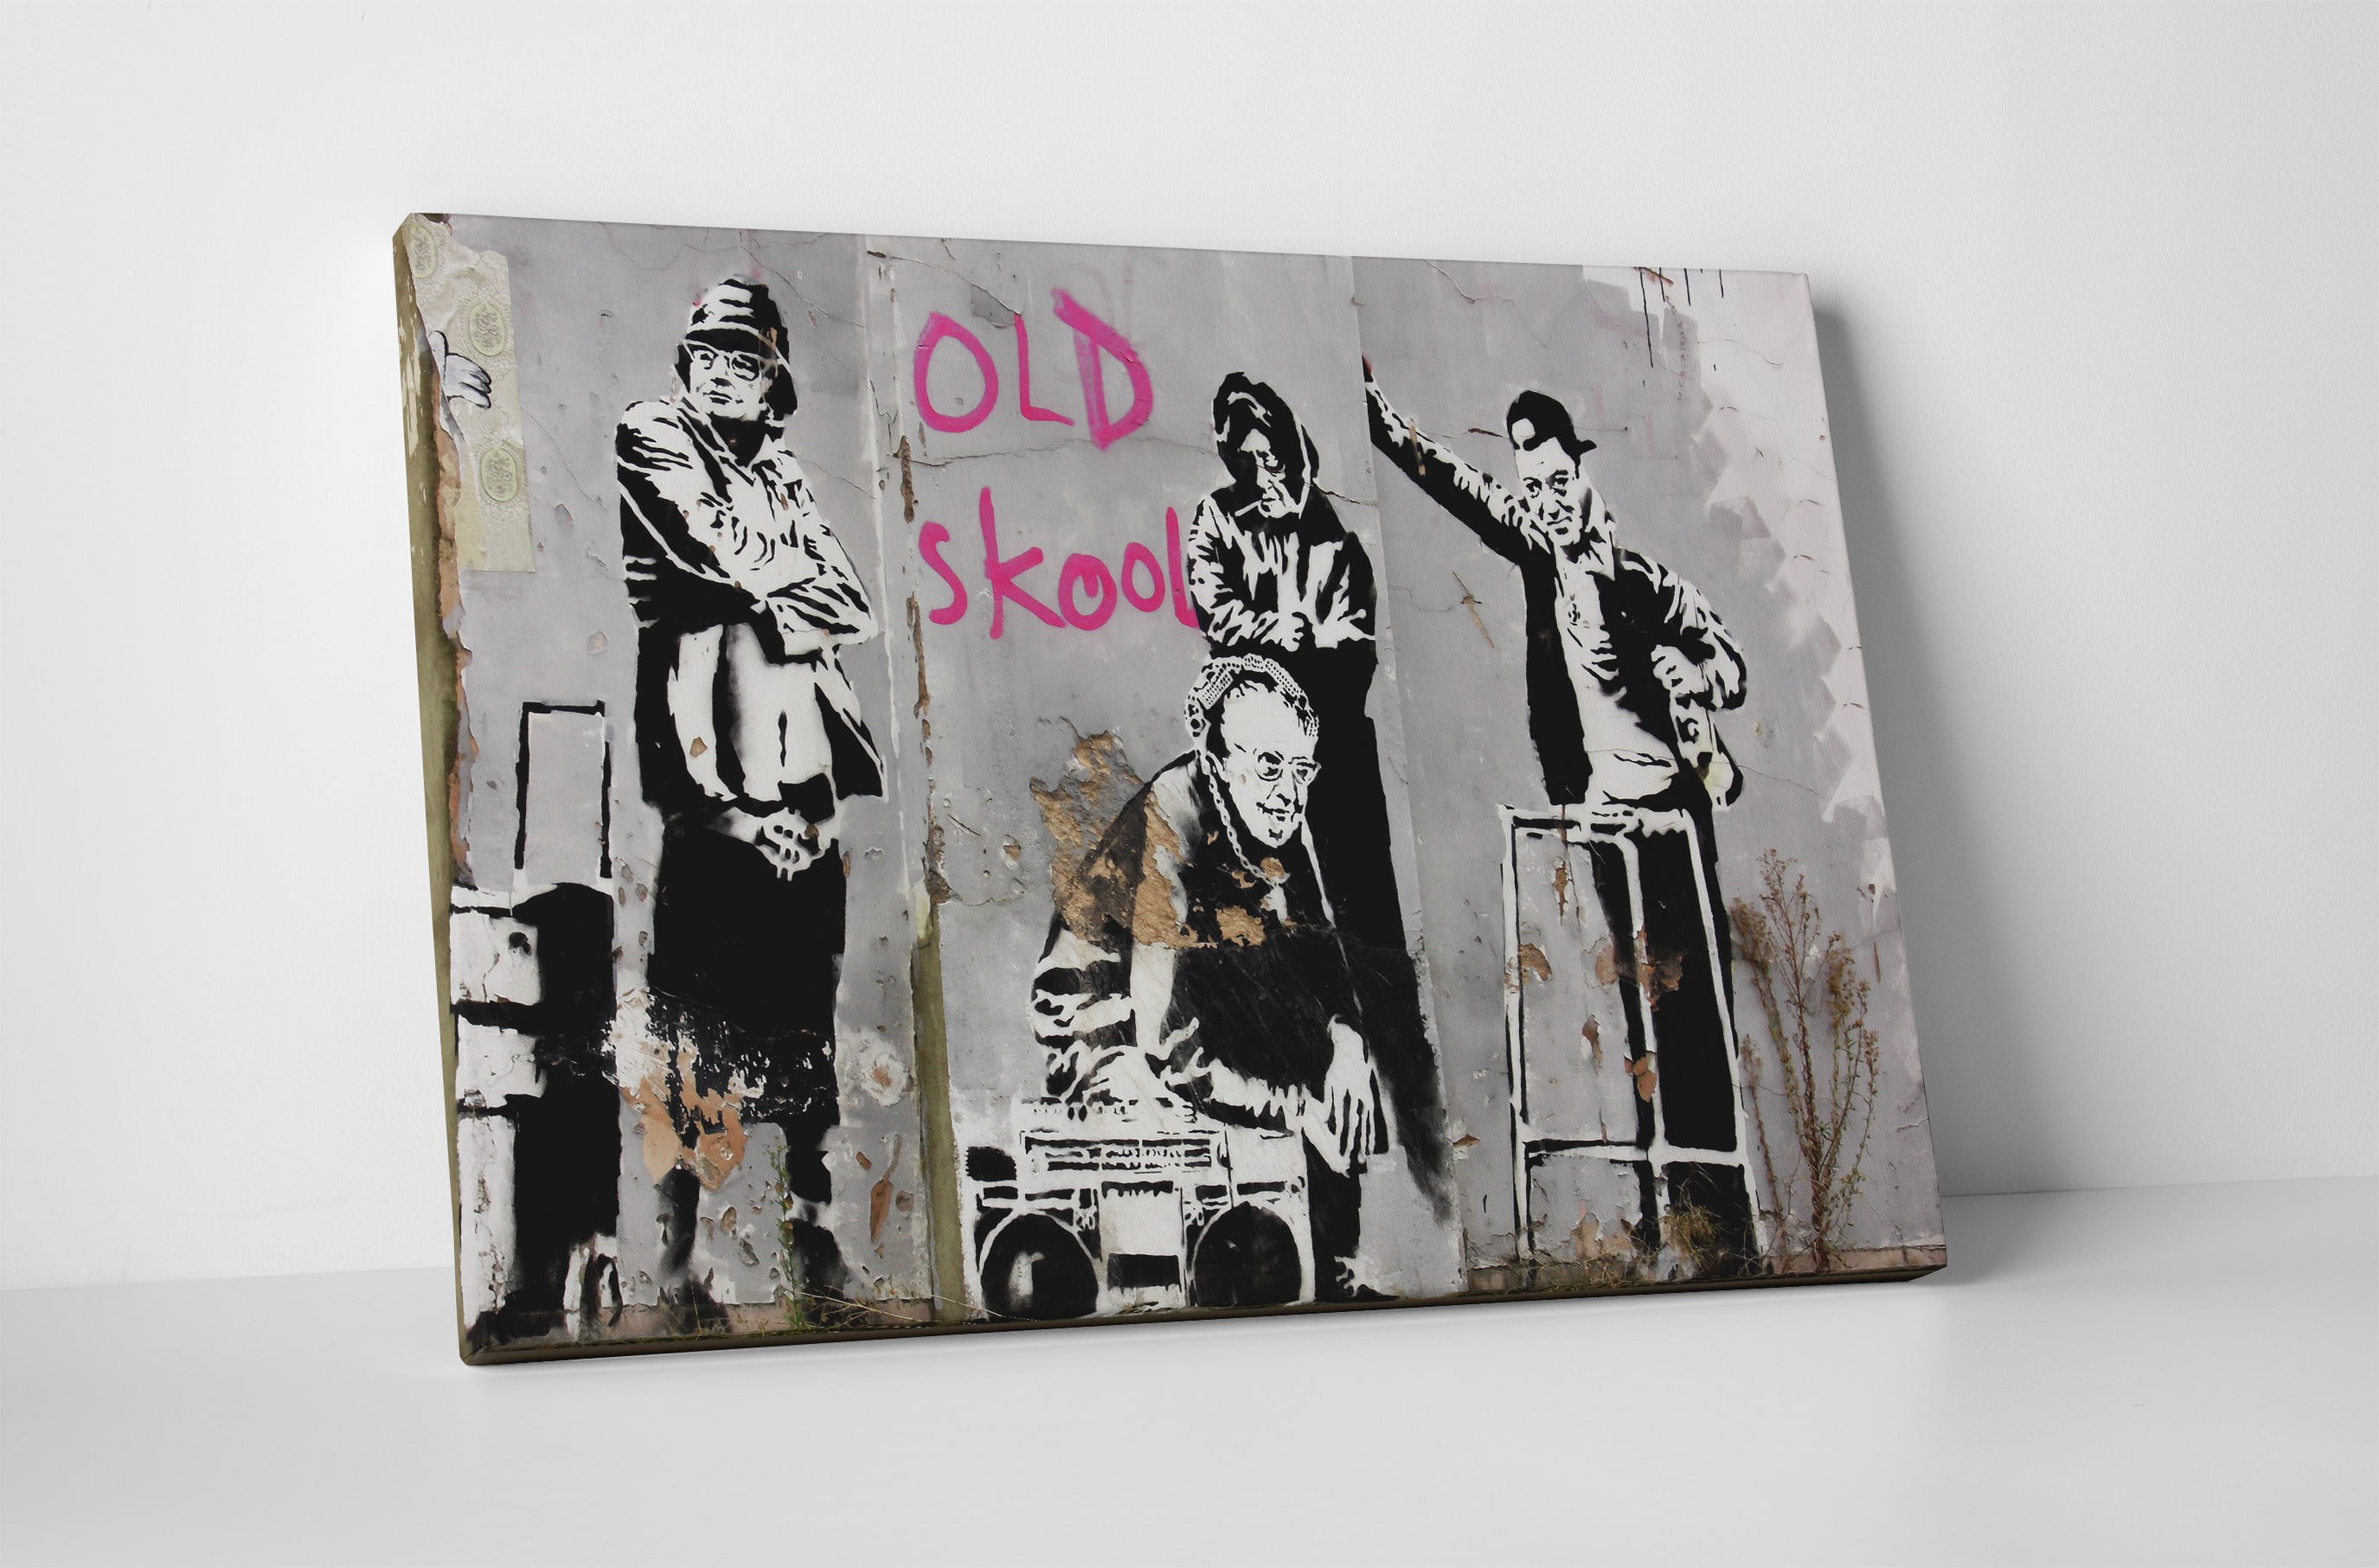 Awkward Styles Banksy Poster Art Unframed Decor Keep Your Coins I Want  Change Image Beggar Artwork Banksy Keep Your Coins Banksy Art Lovers Gifts